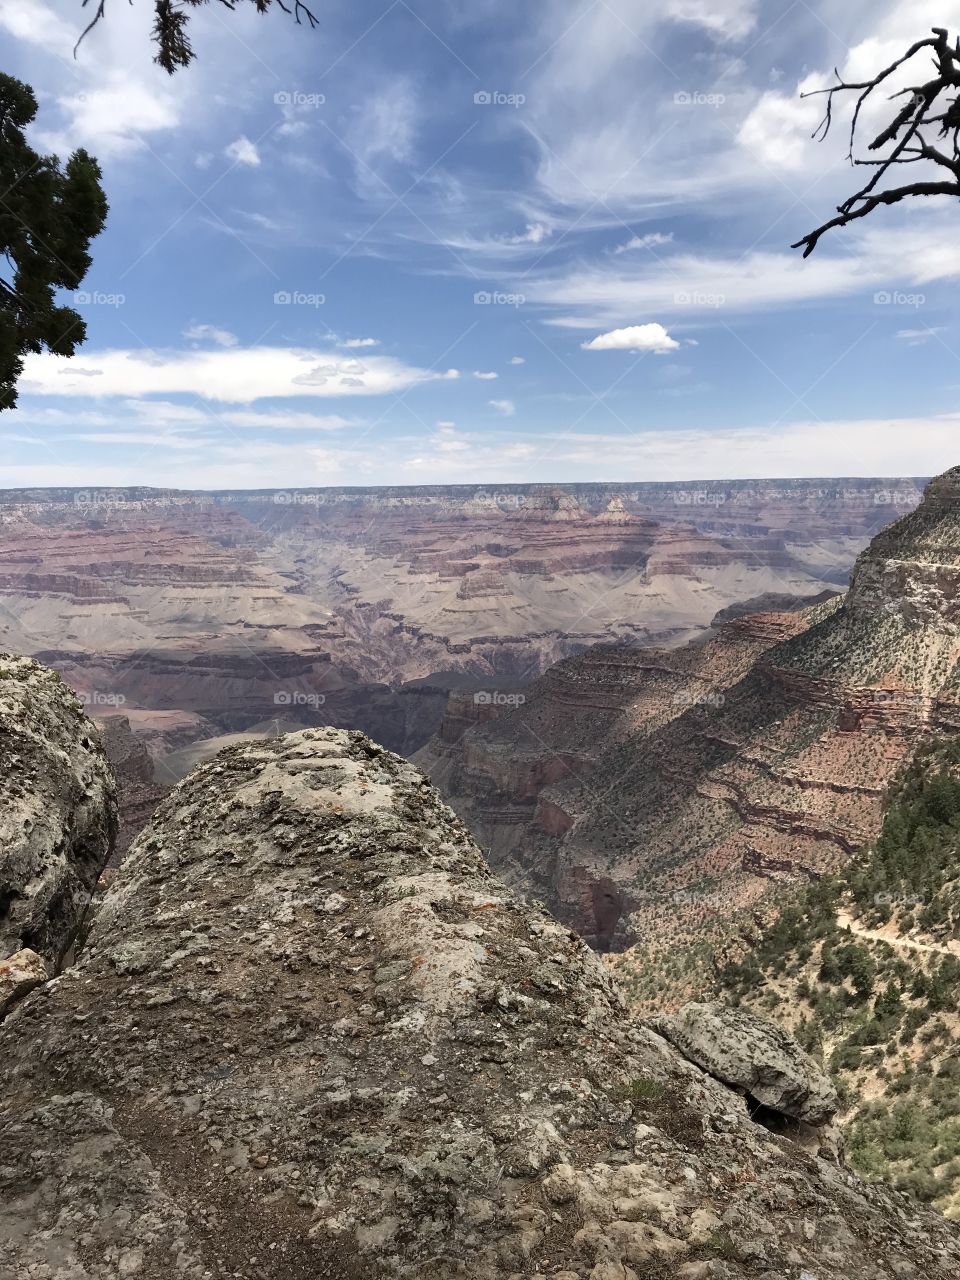 Looking over the edge into the expansive and beautiful rock formations of the Grand Canyon during midday. 